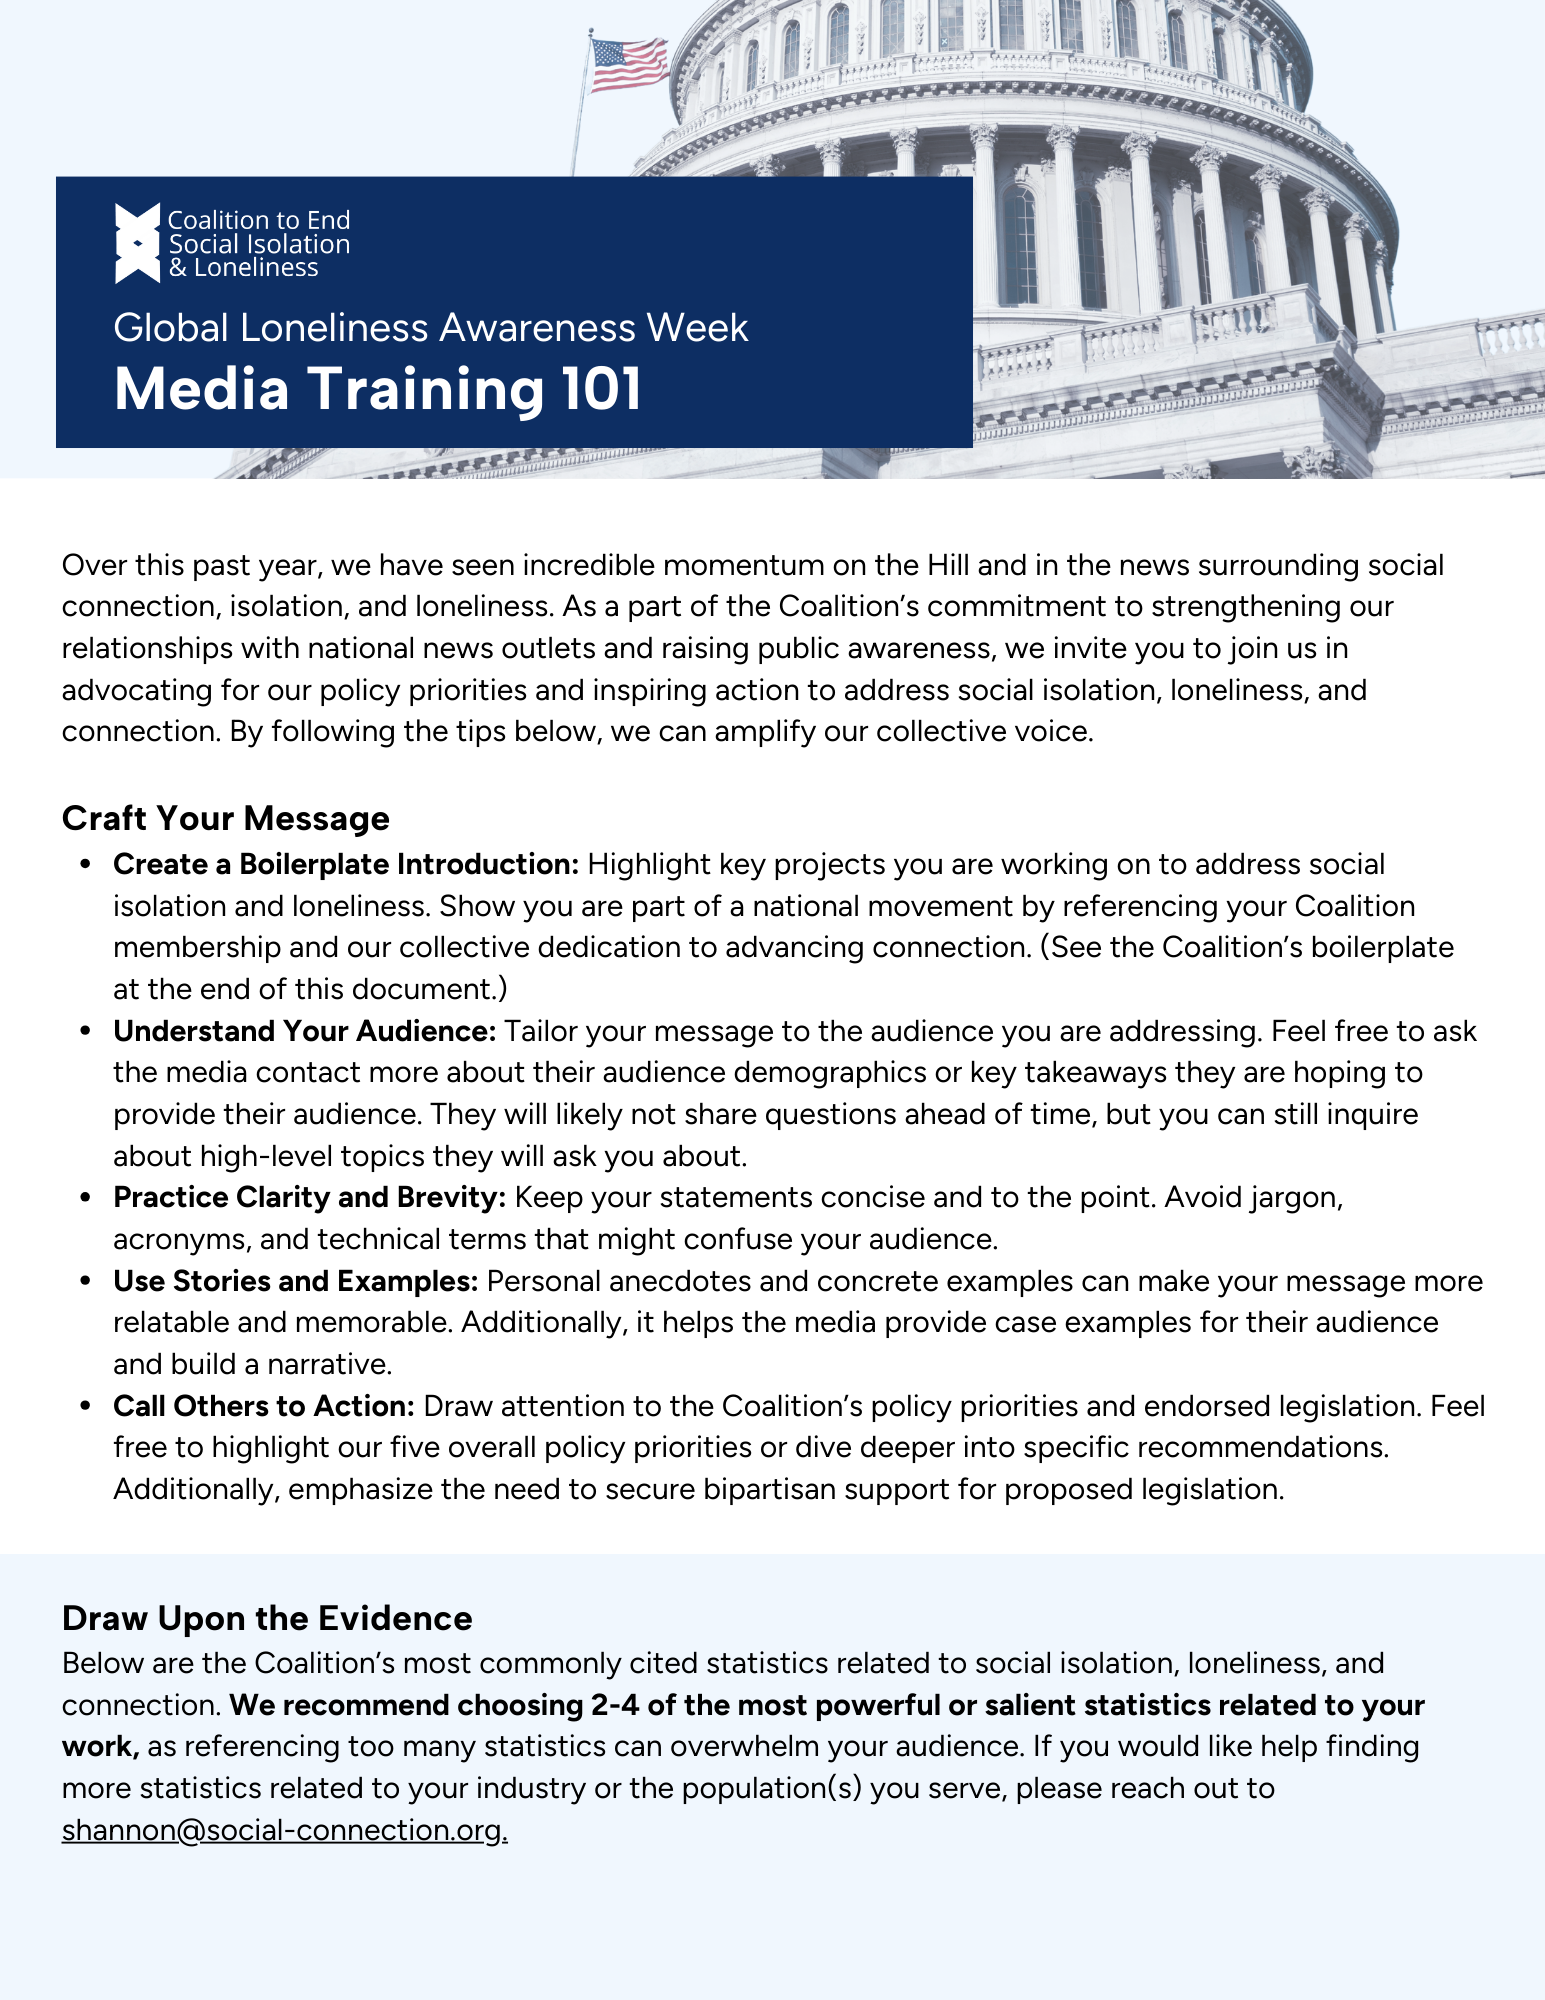 Protected: Media Training 101